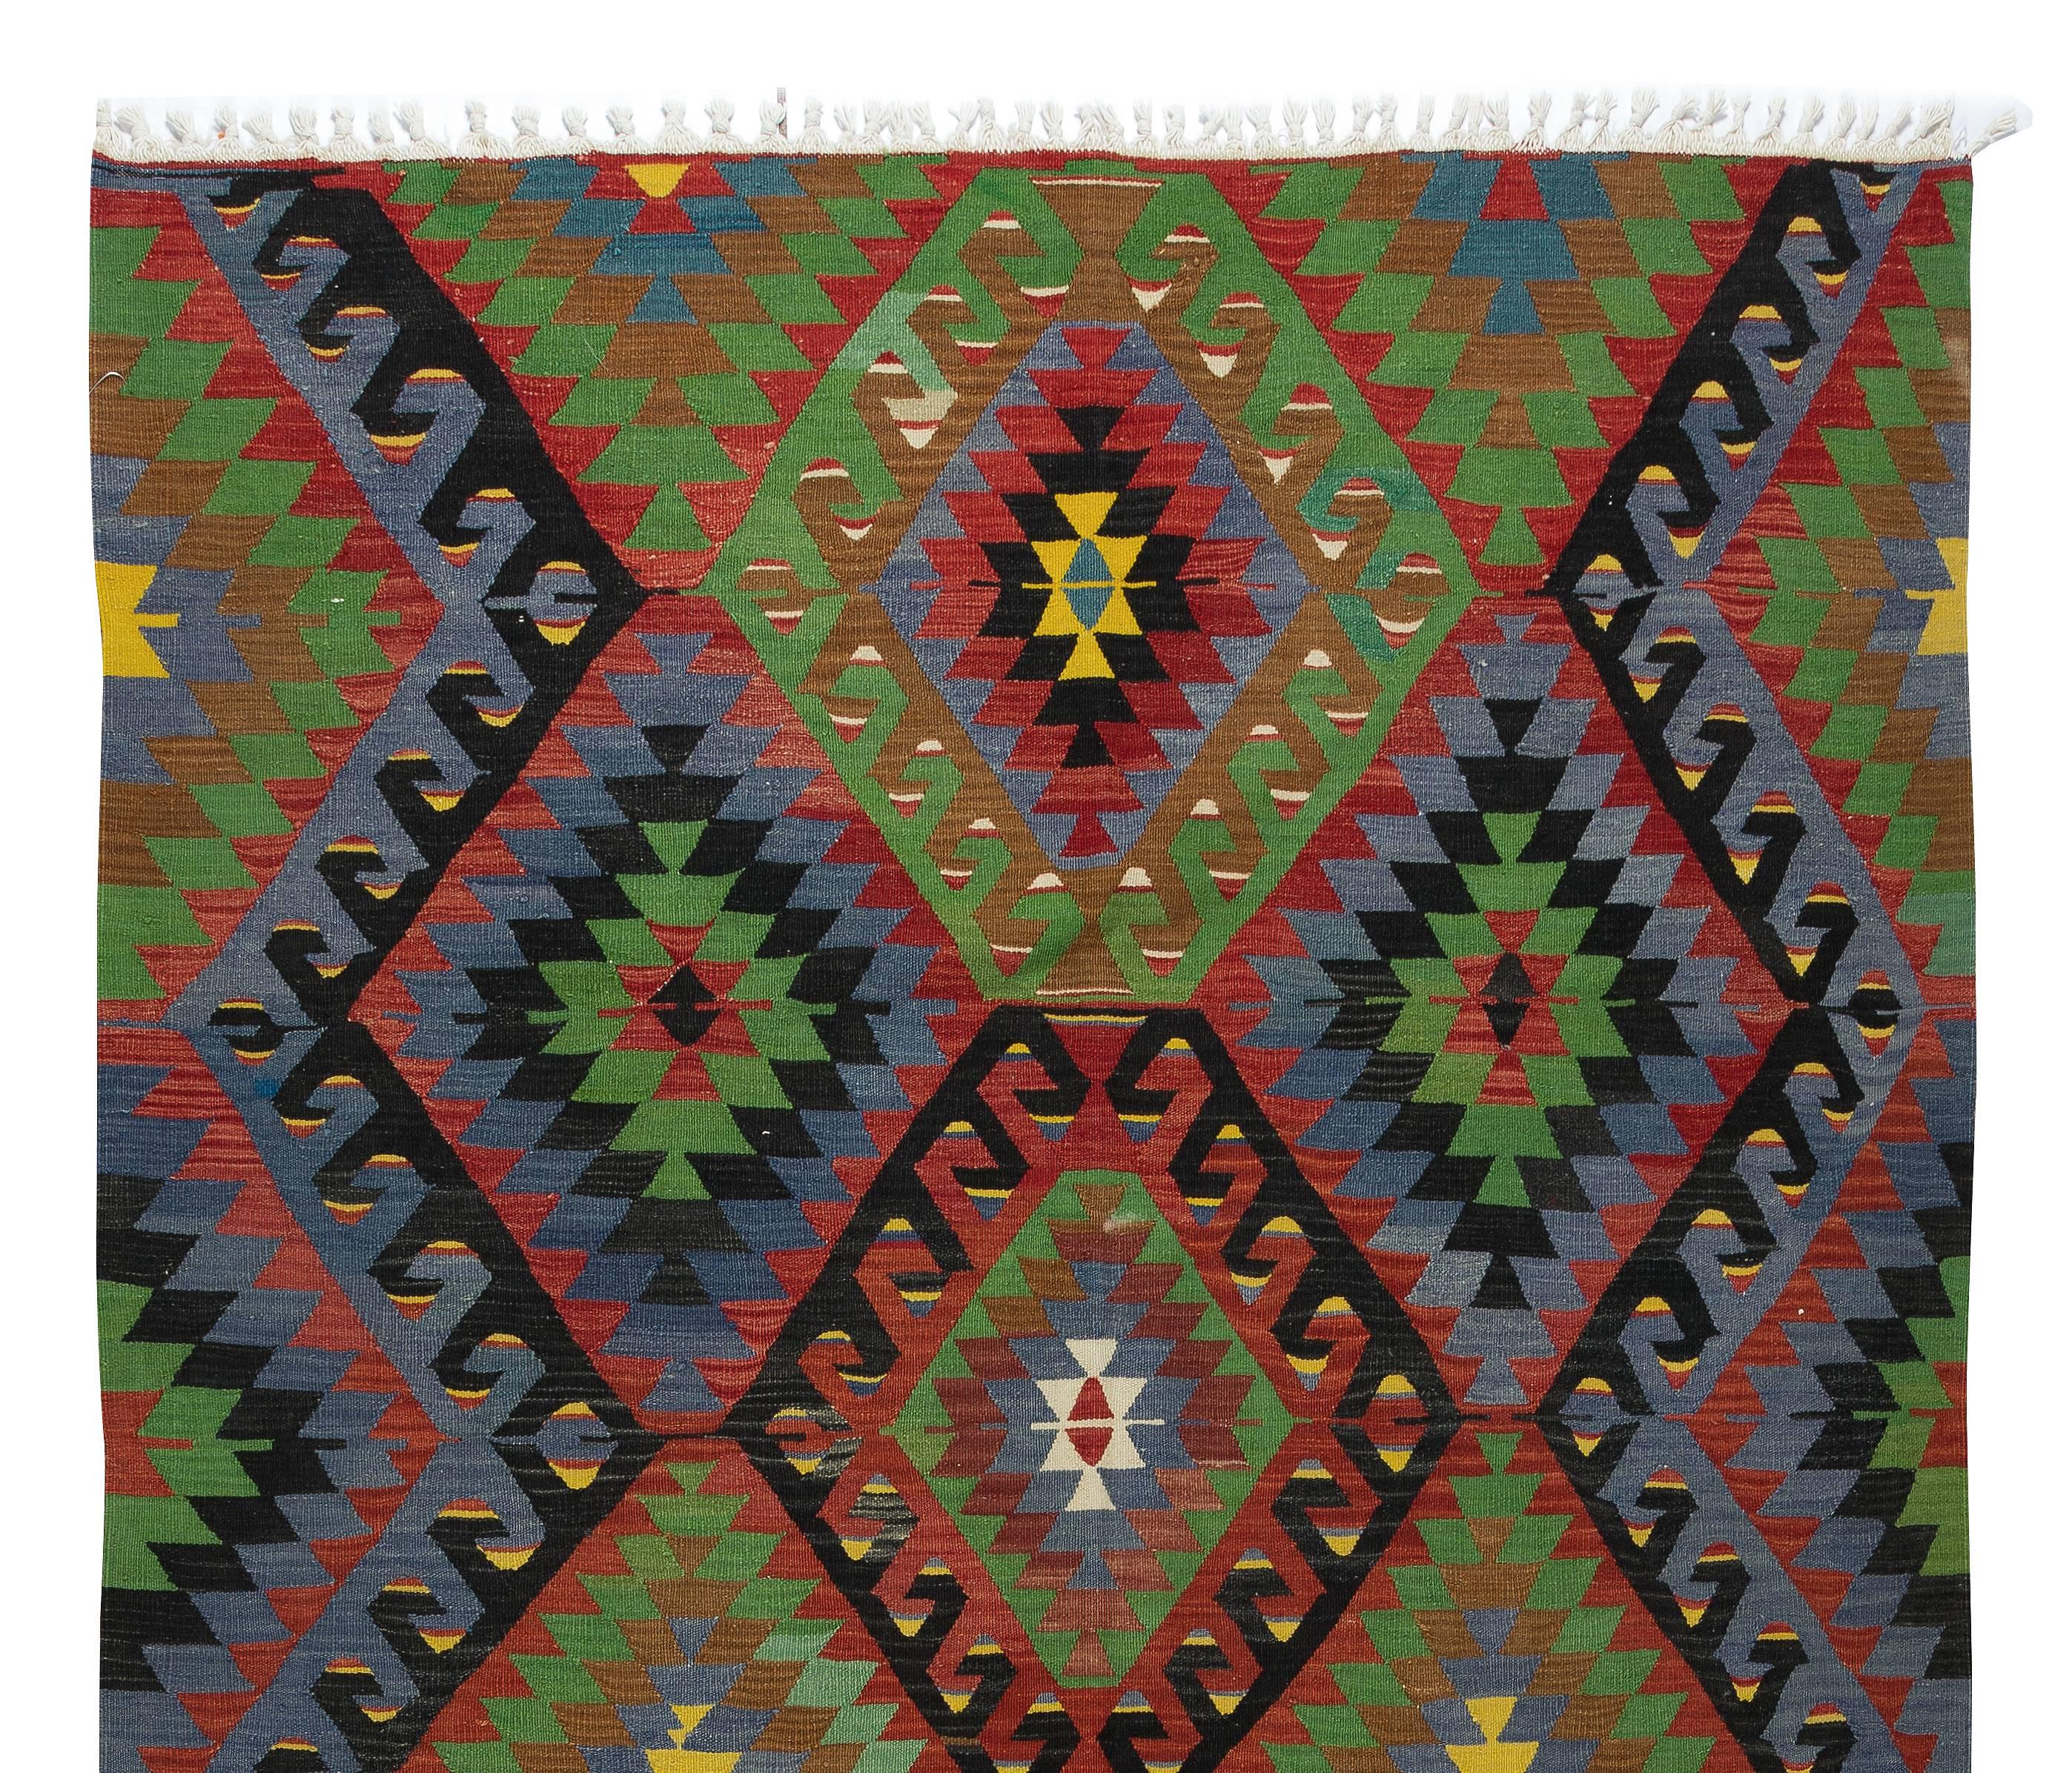 5.6x9.3 Ft Multicolored Handmade Turkish Wool Kilim, One of a Kind FlatWeave Rug In Good Condition For Sale In Philadelphia, PA